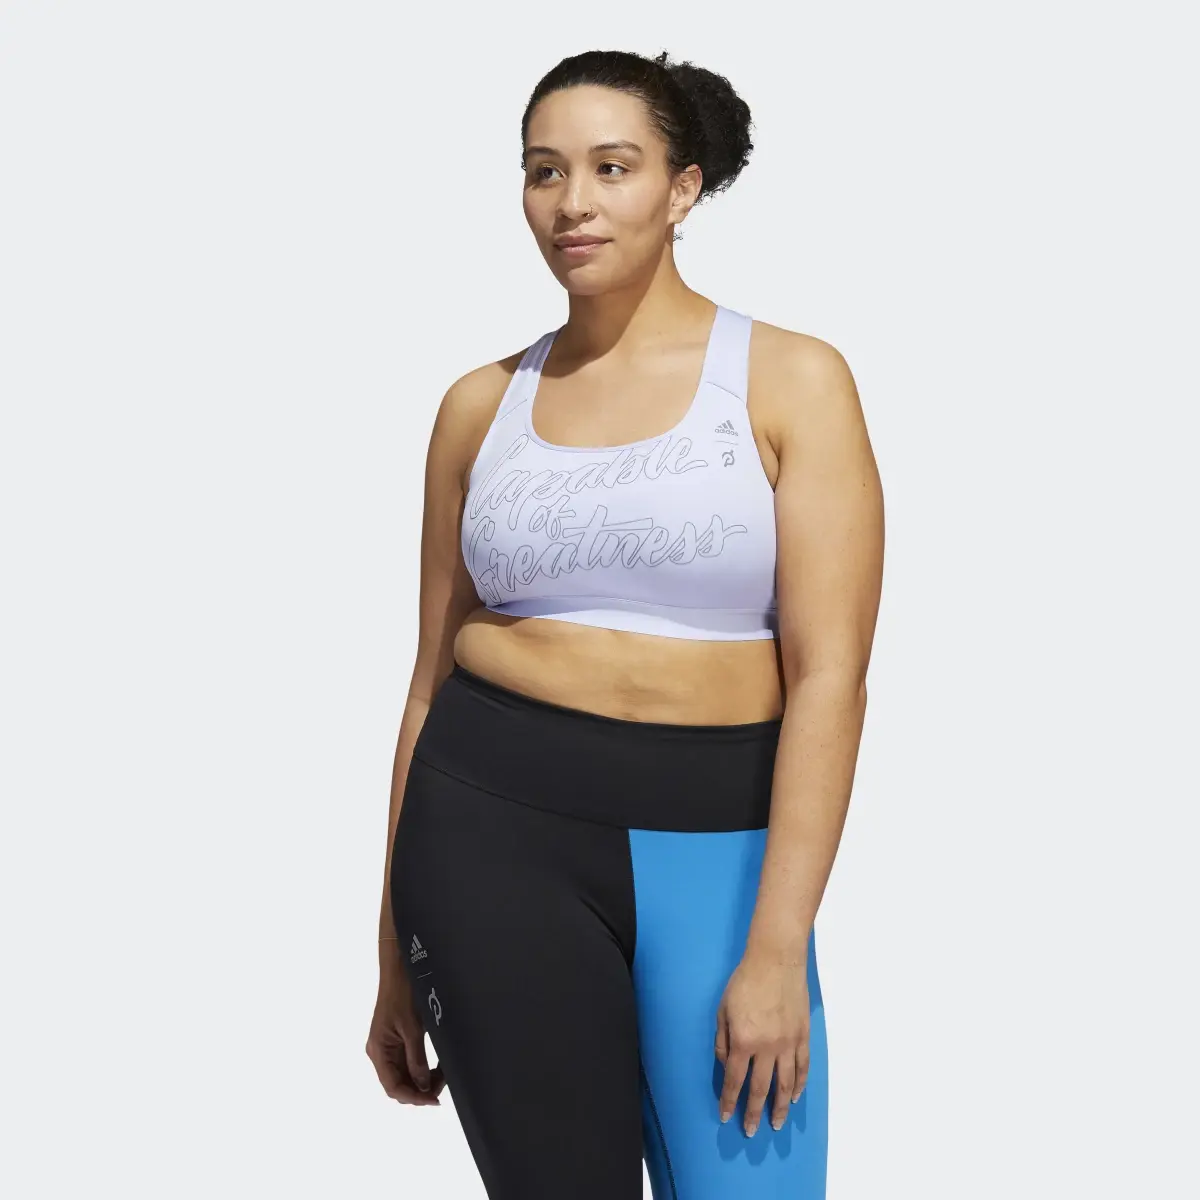 Adidas Capable of Greatness Bra (Plus Size). 2